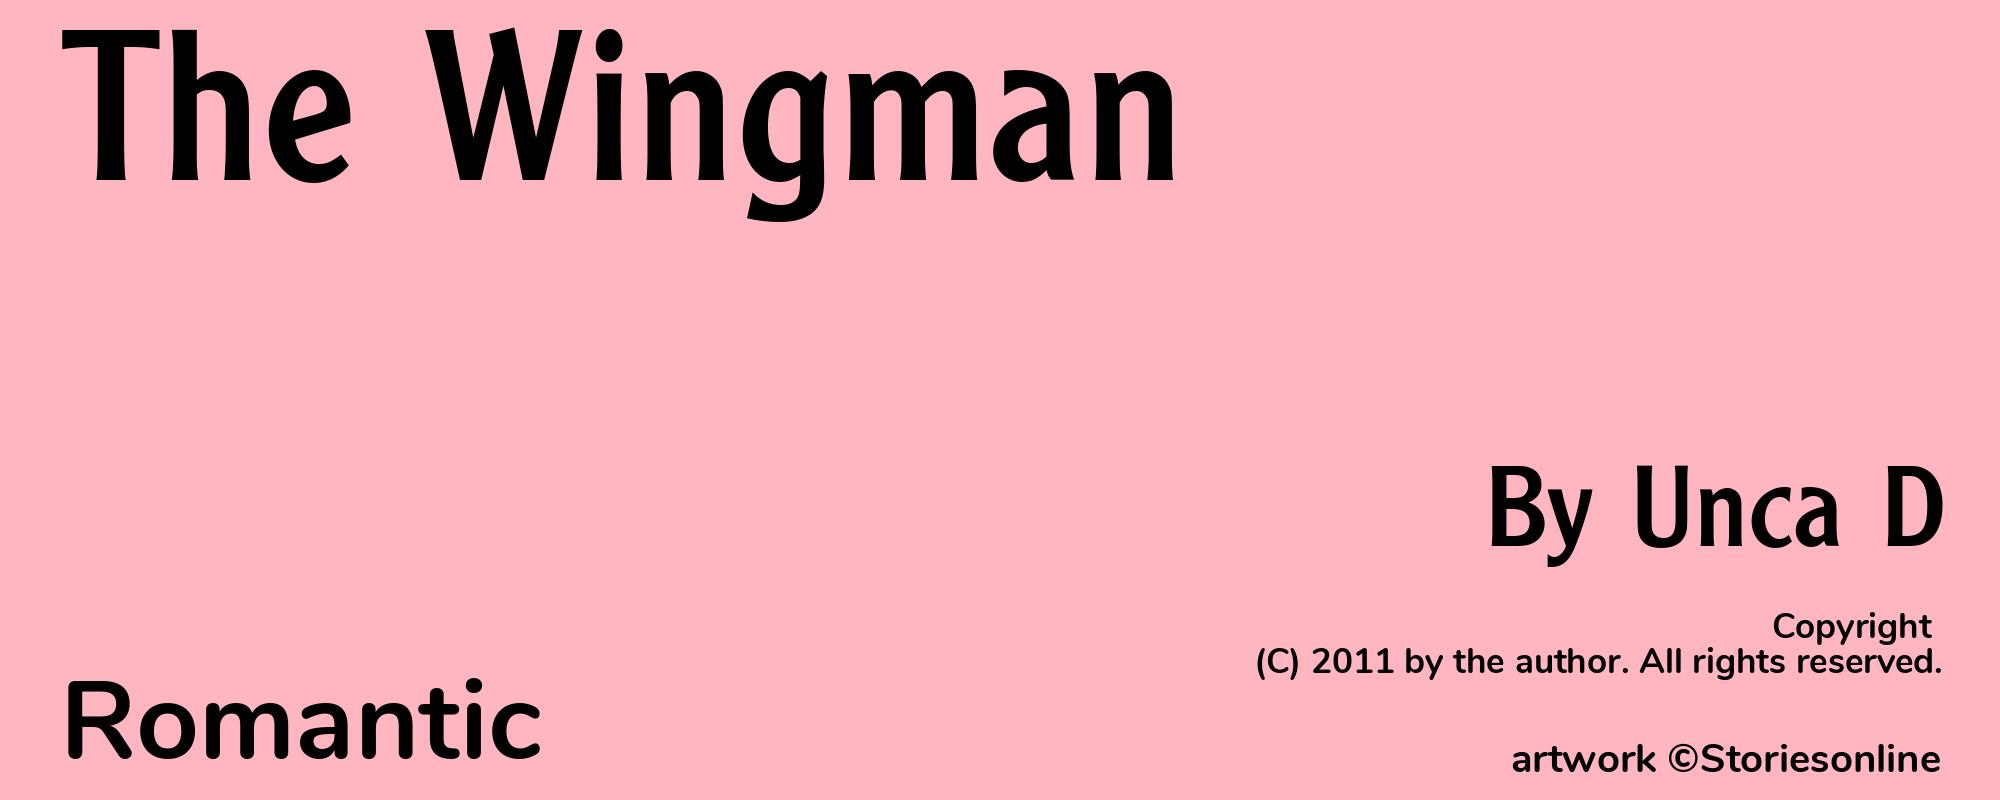 The Wingman - Cover